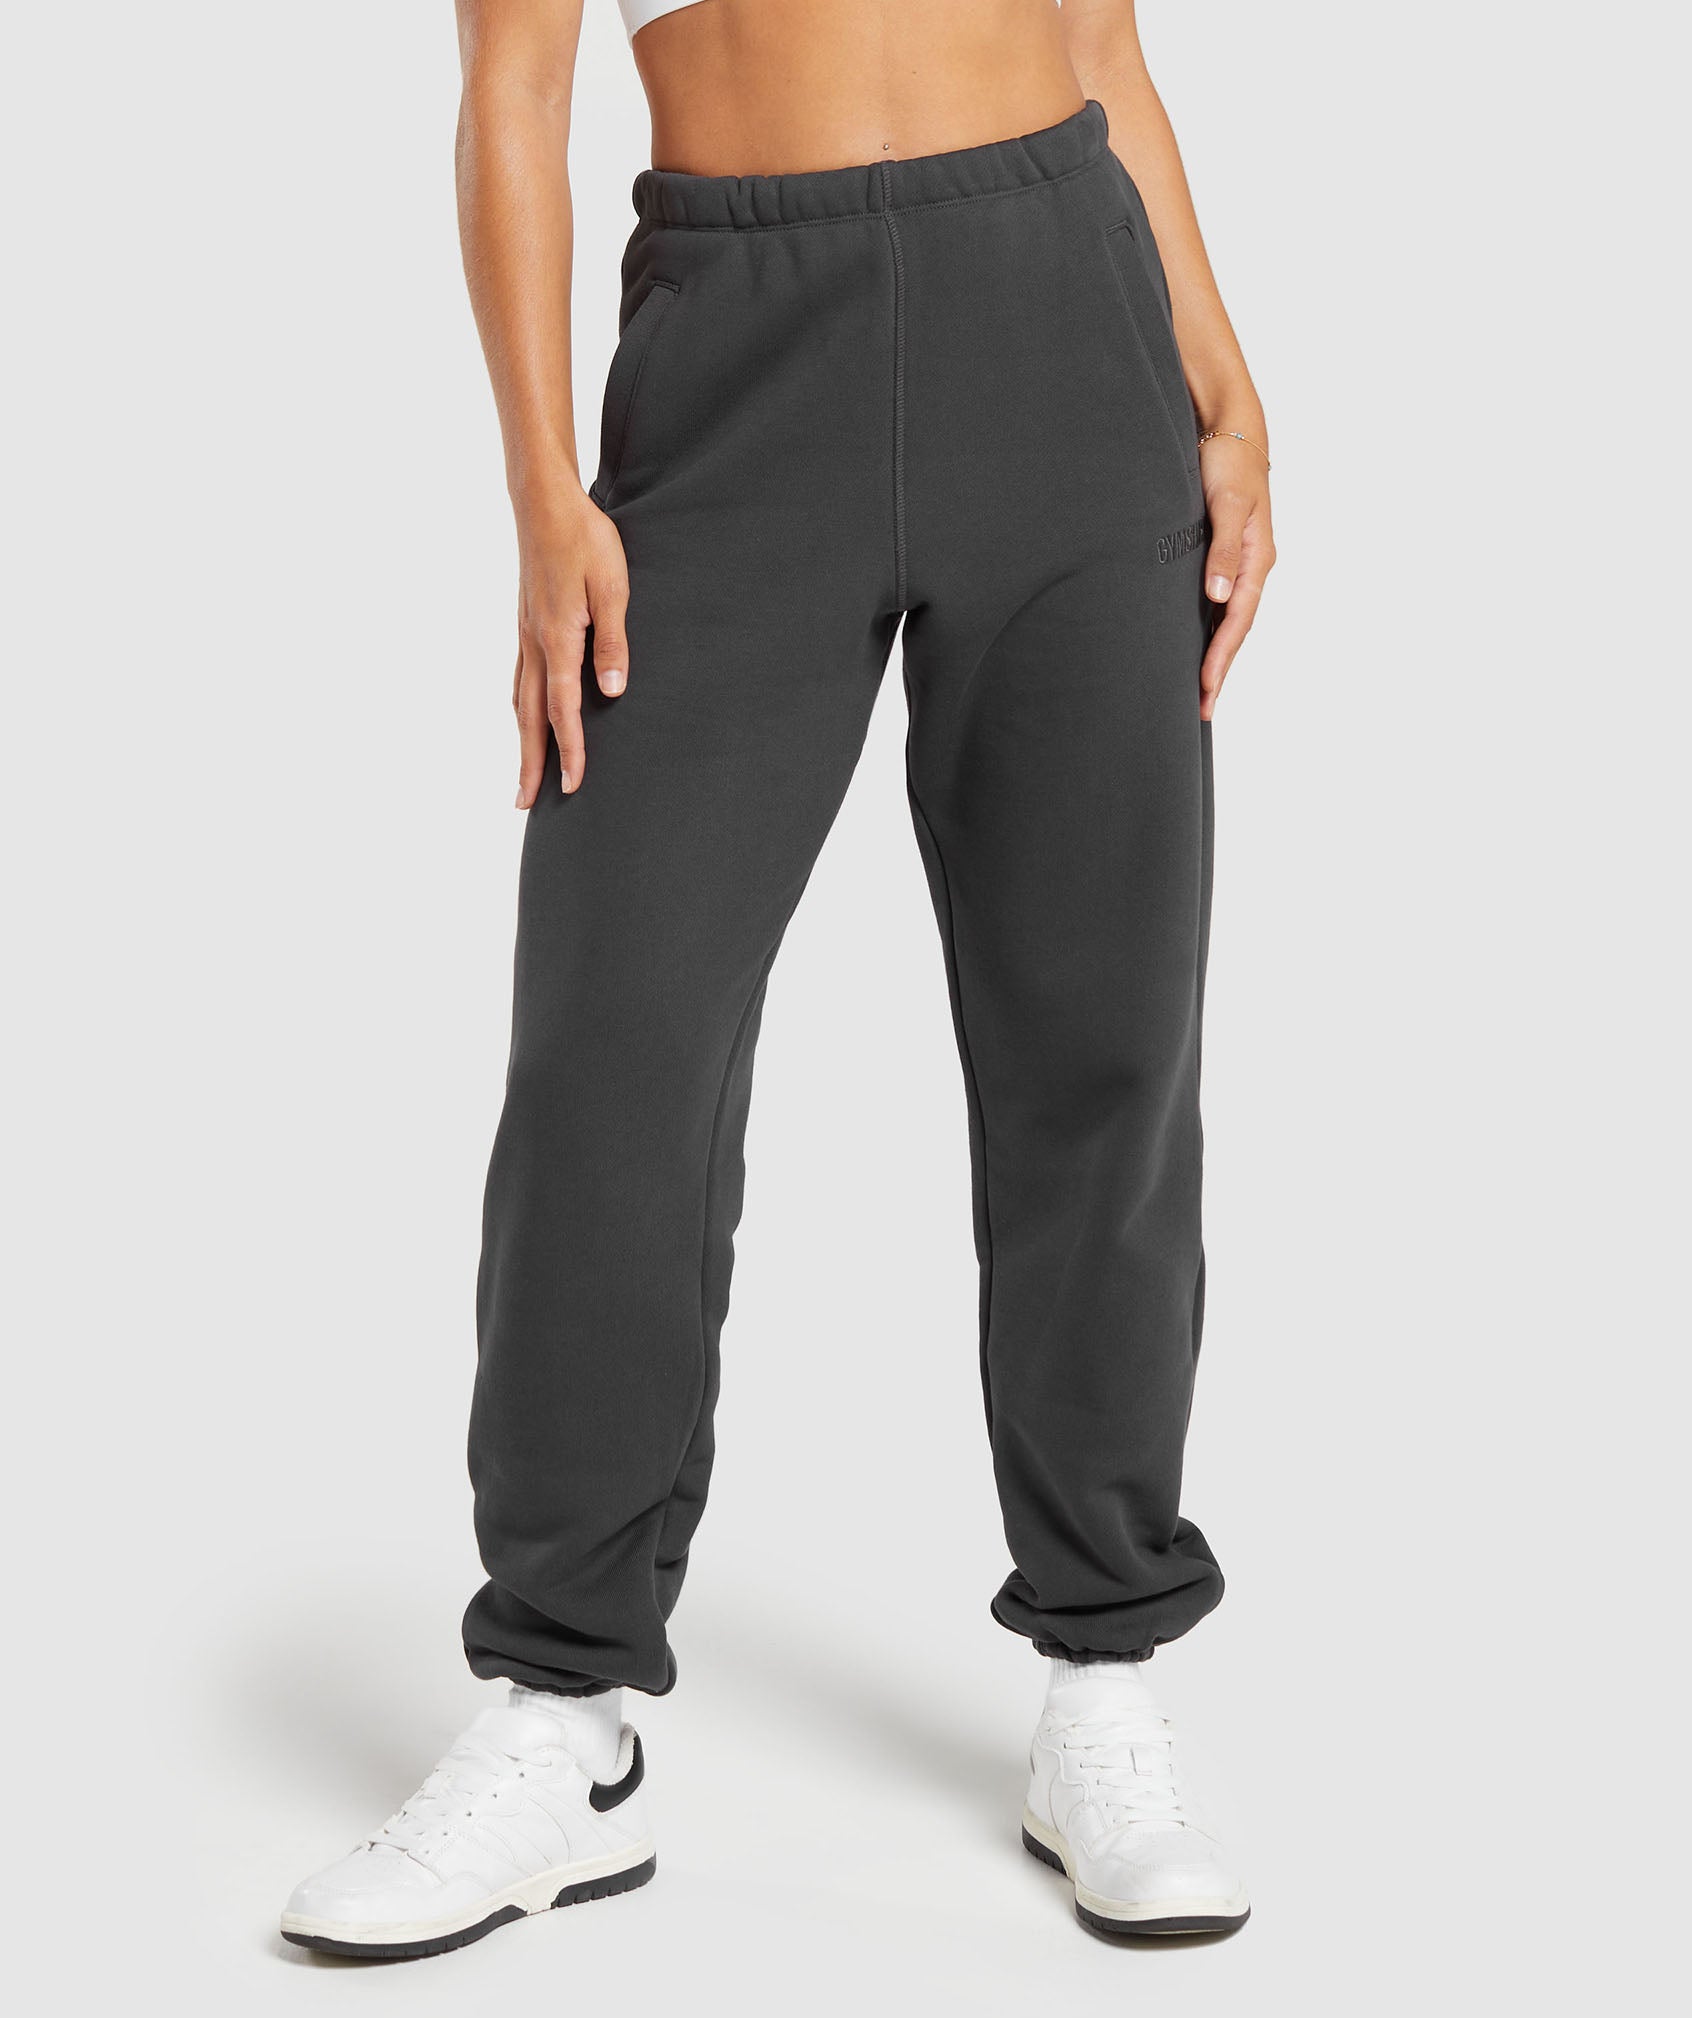   Essentials Women's Fleece Jogger Sweatpant (Available in Plus  Size), Black, X-Small : Clothing, Shoes & Jewelry